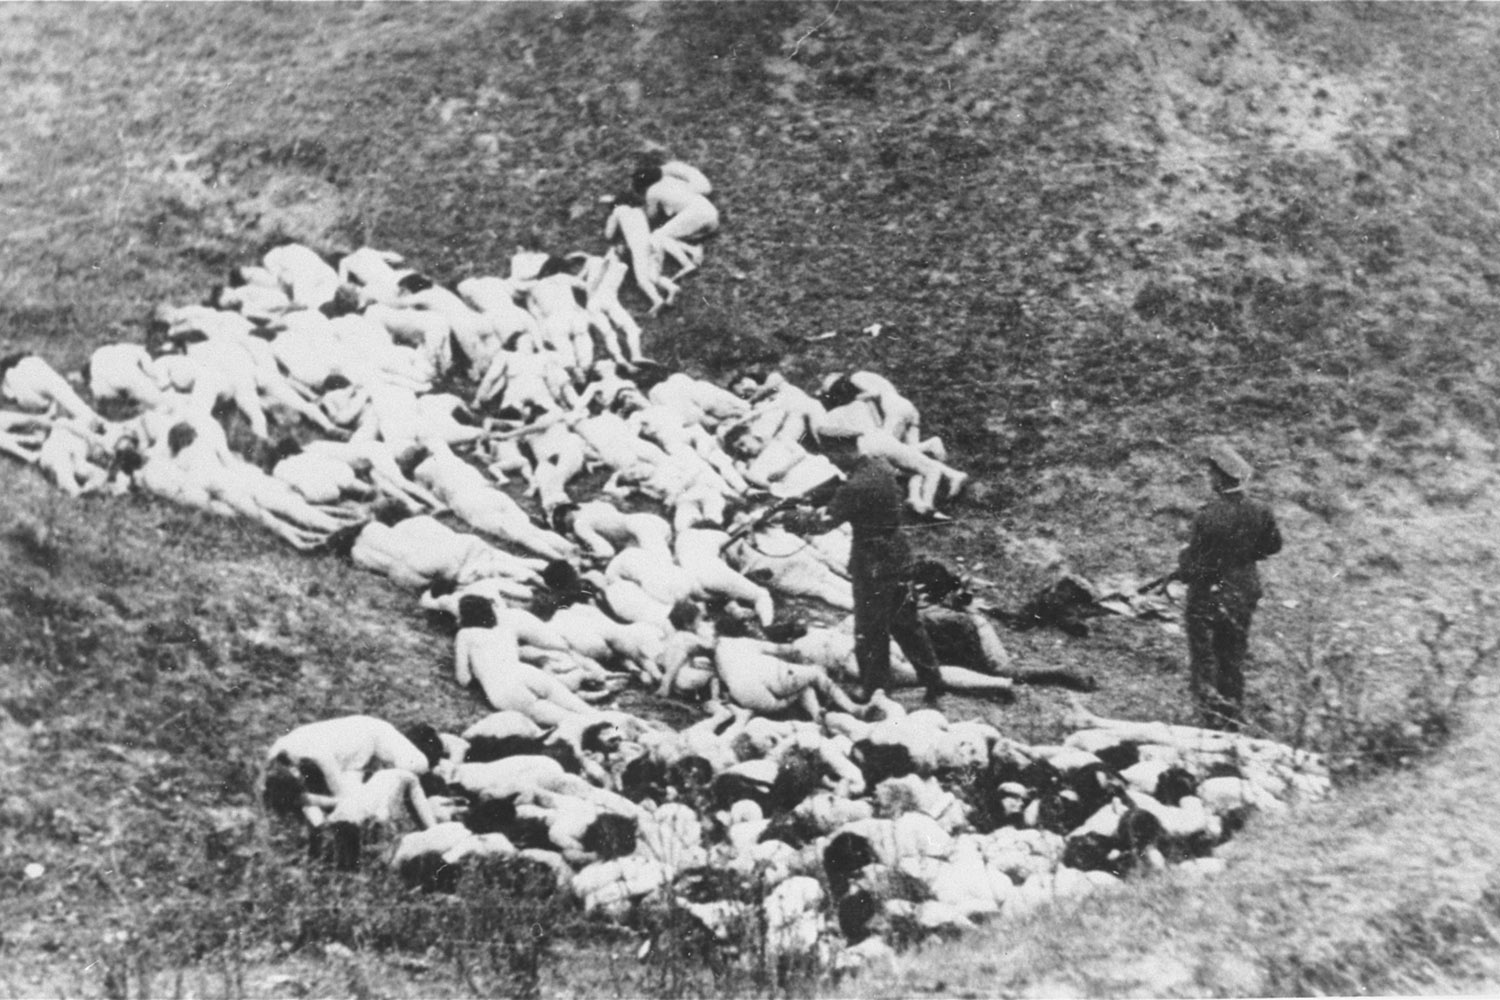 A German police officer shoots Jewish women still alive after a mass execution of Jews from the Mizocz ghetto, former Poland, 1942.